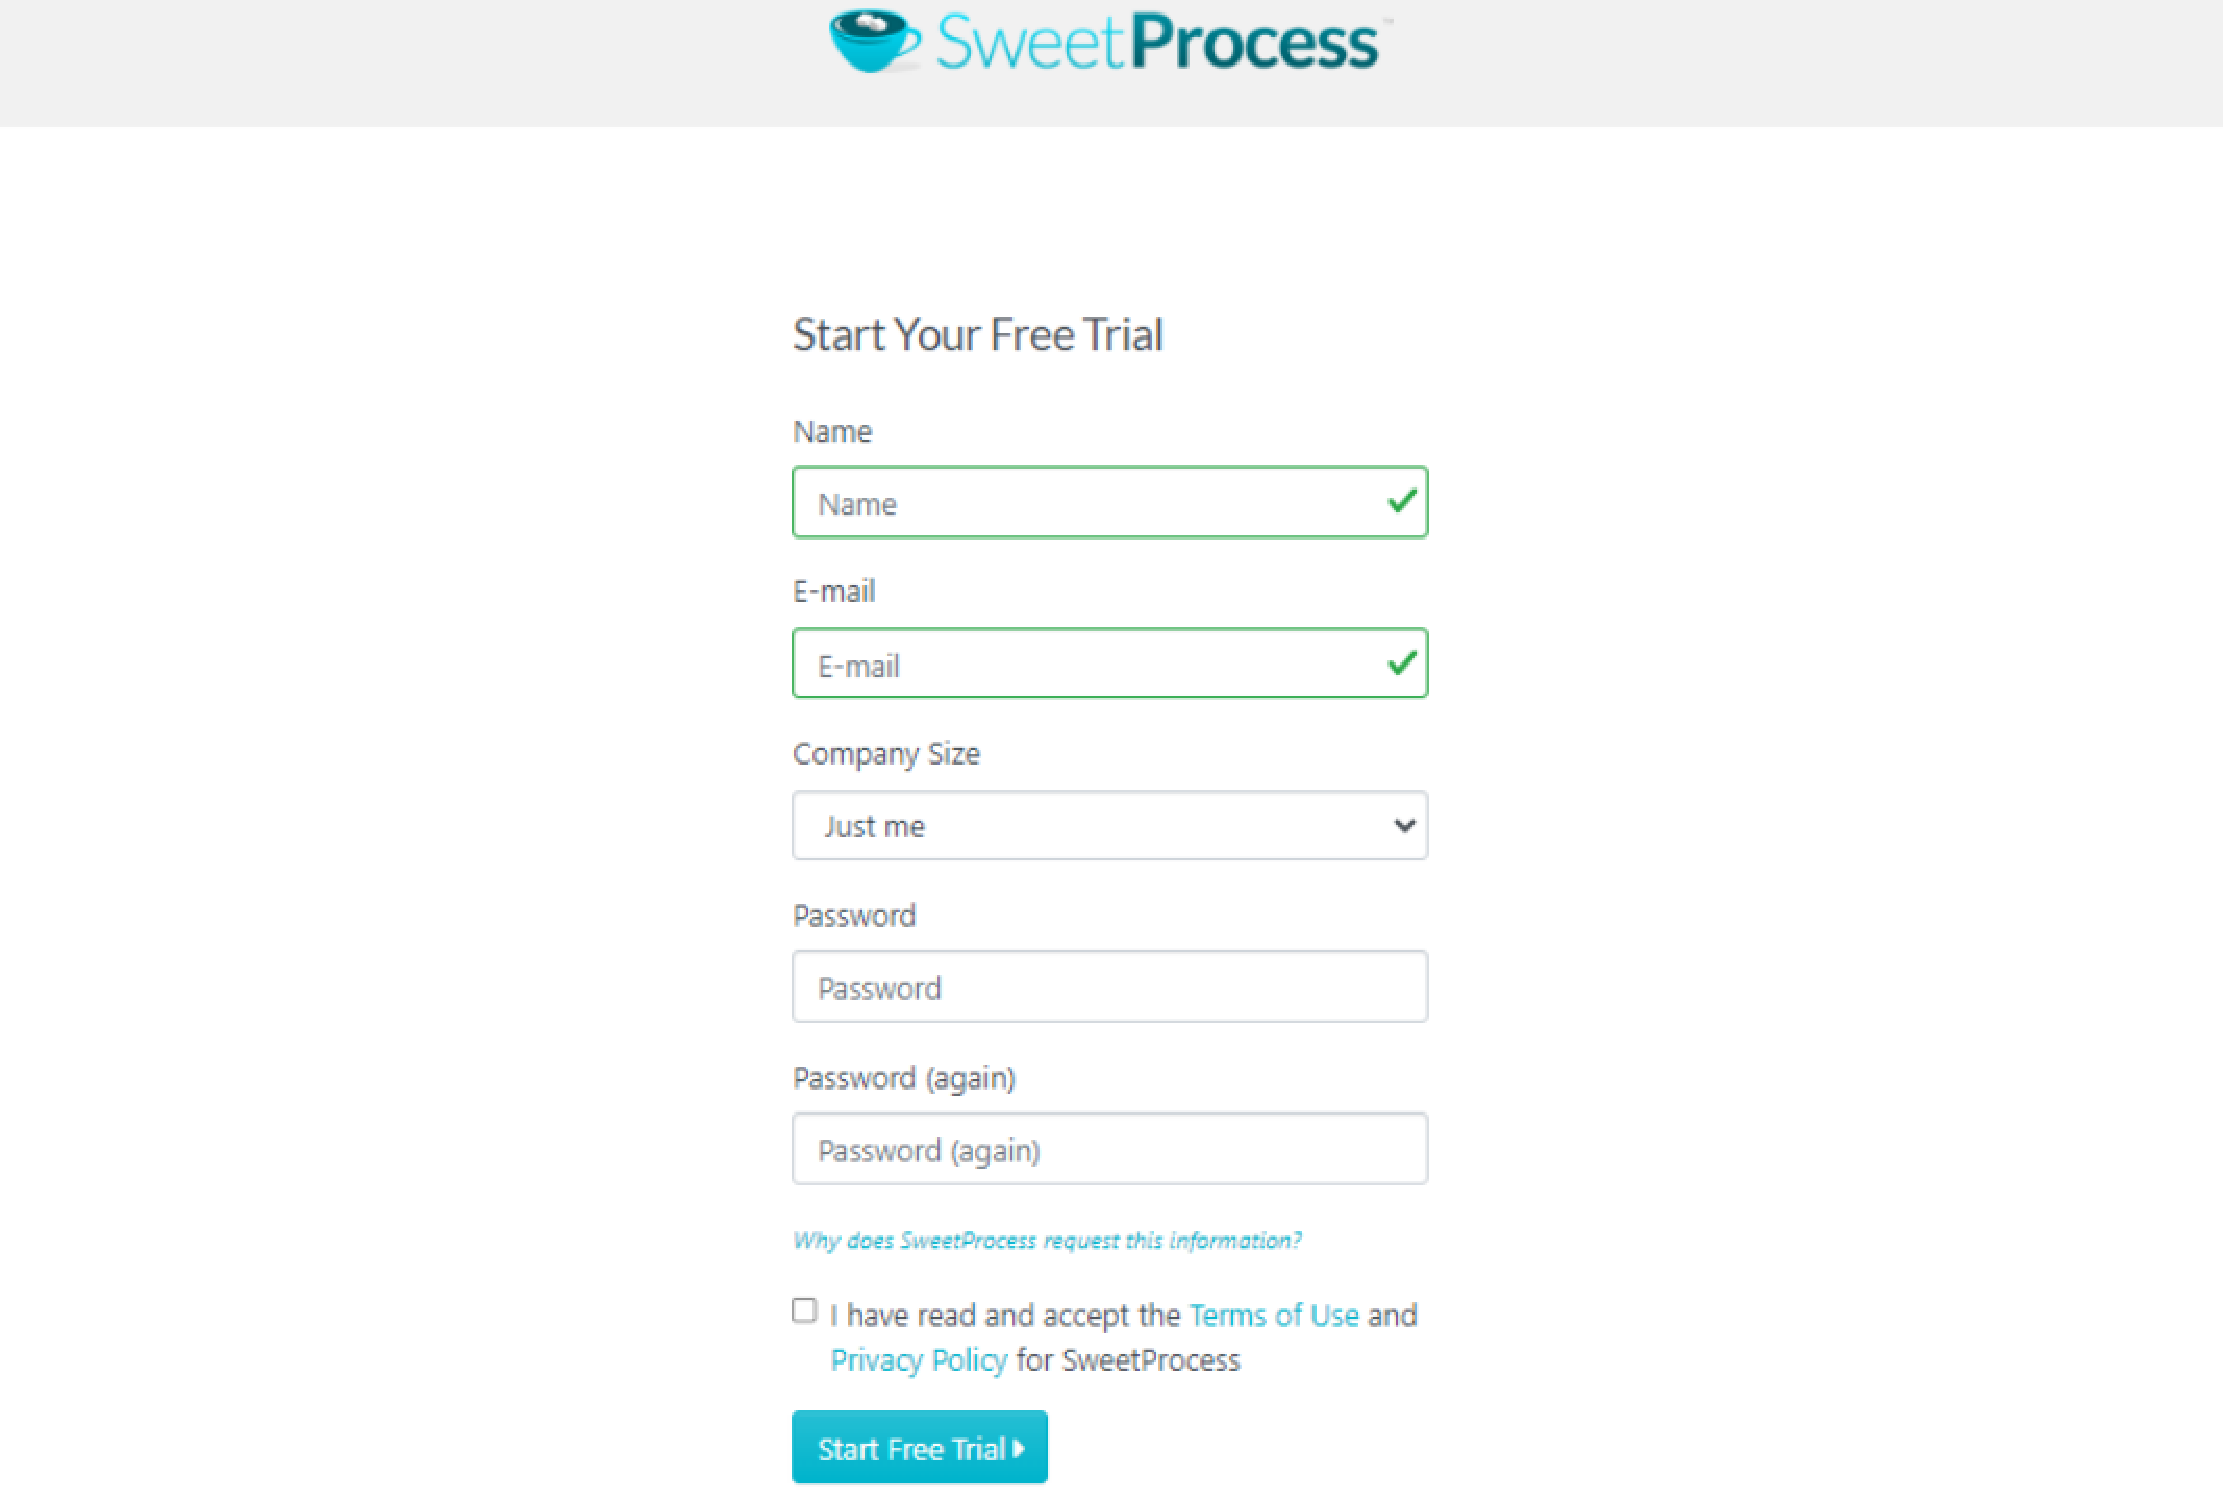 Sign up for a SweetProcess Account